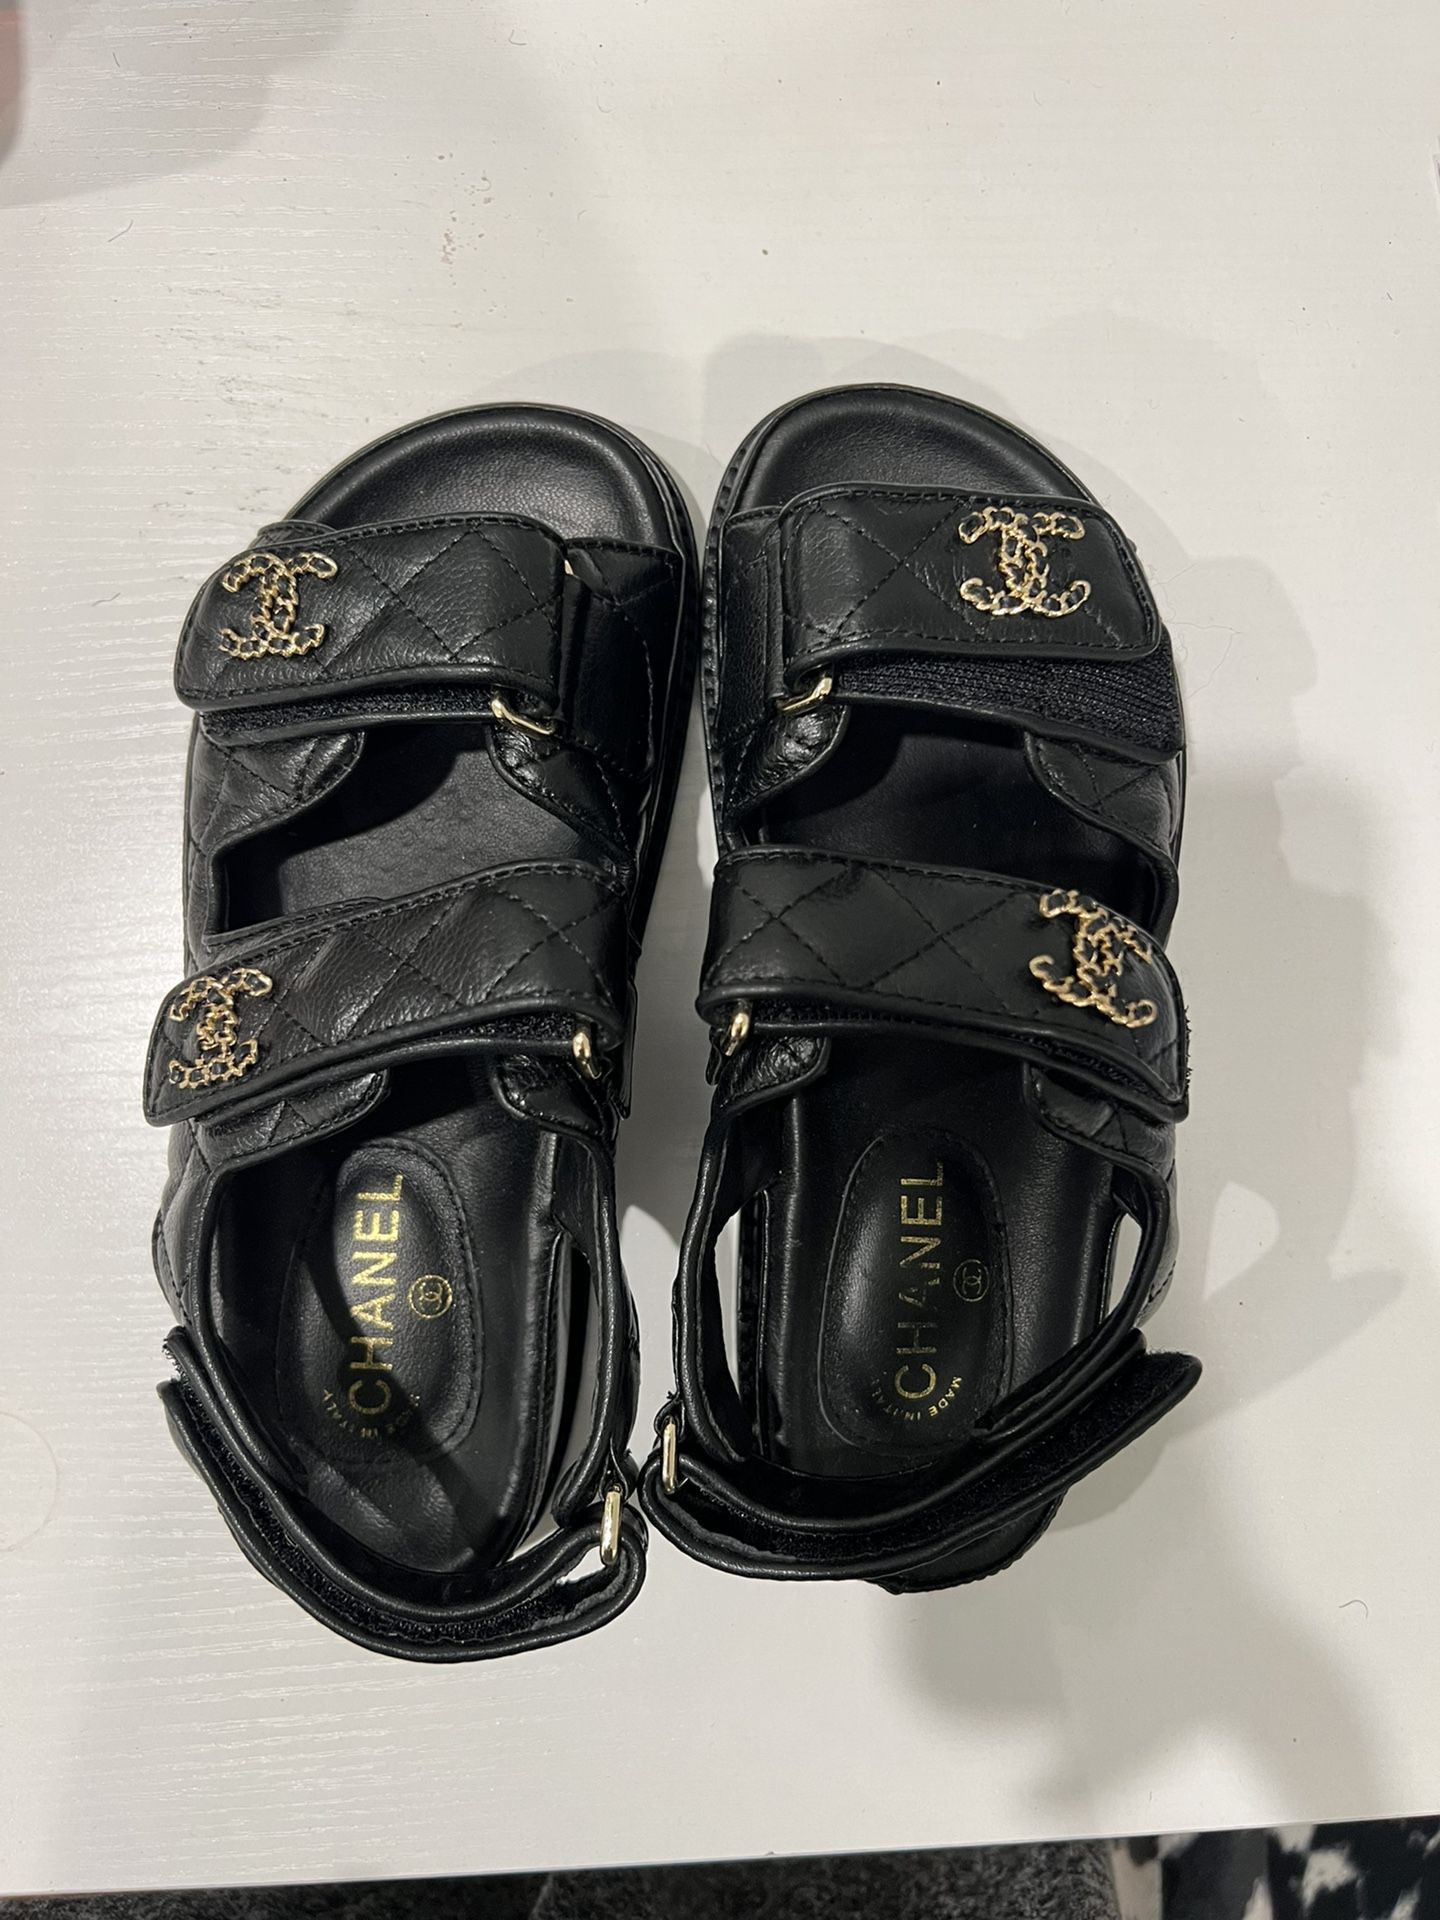 CHANEL, Shoes, Chanel White Black Dad Sandals Leather Cc Logo Open Toe  Flats Authentic